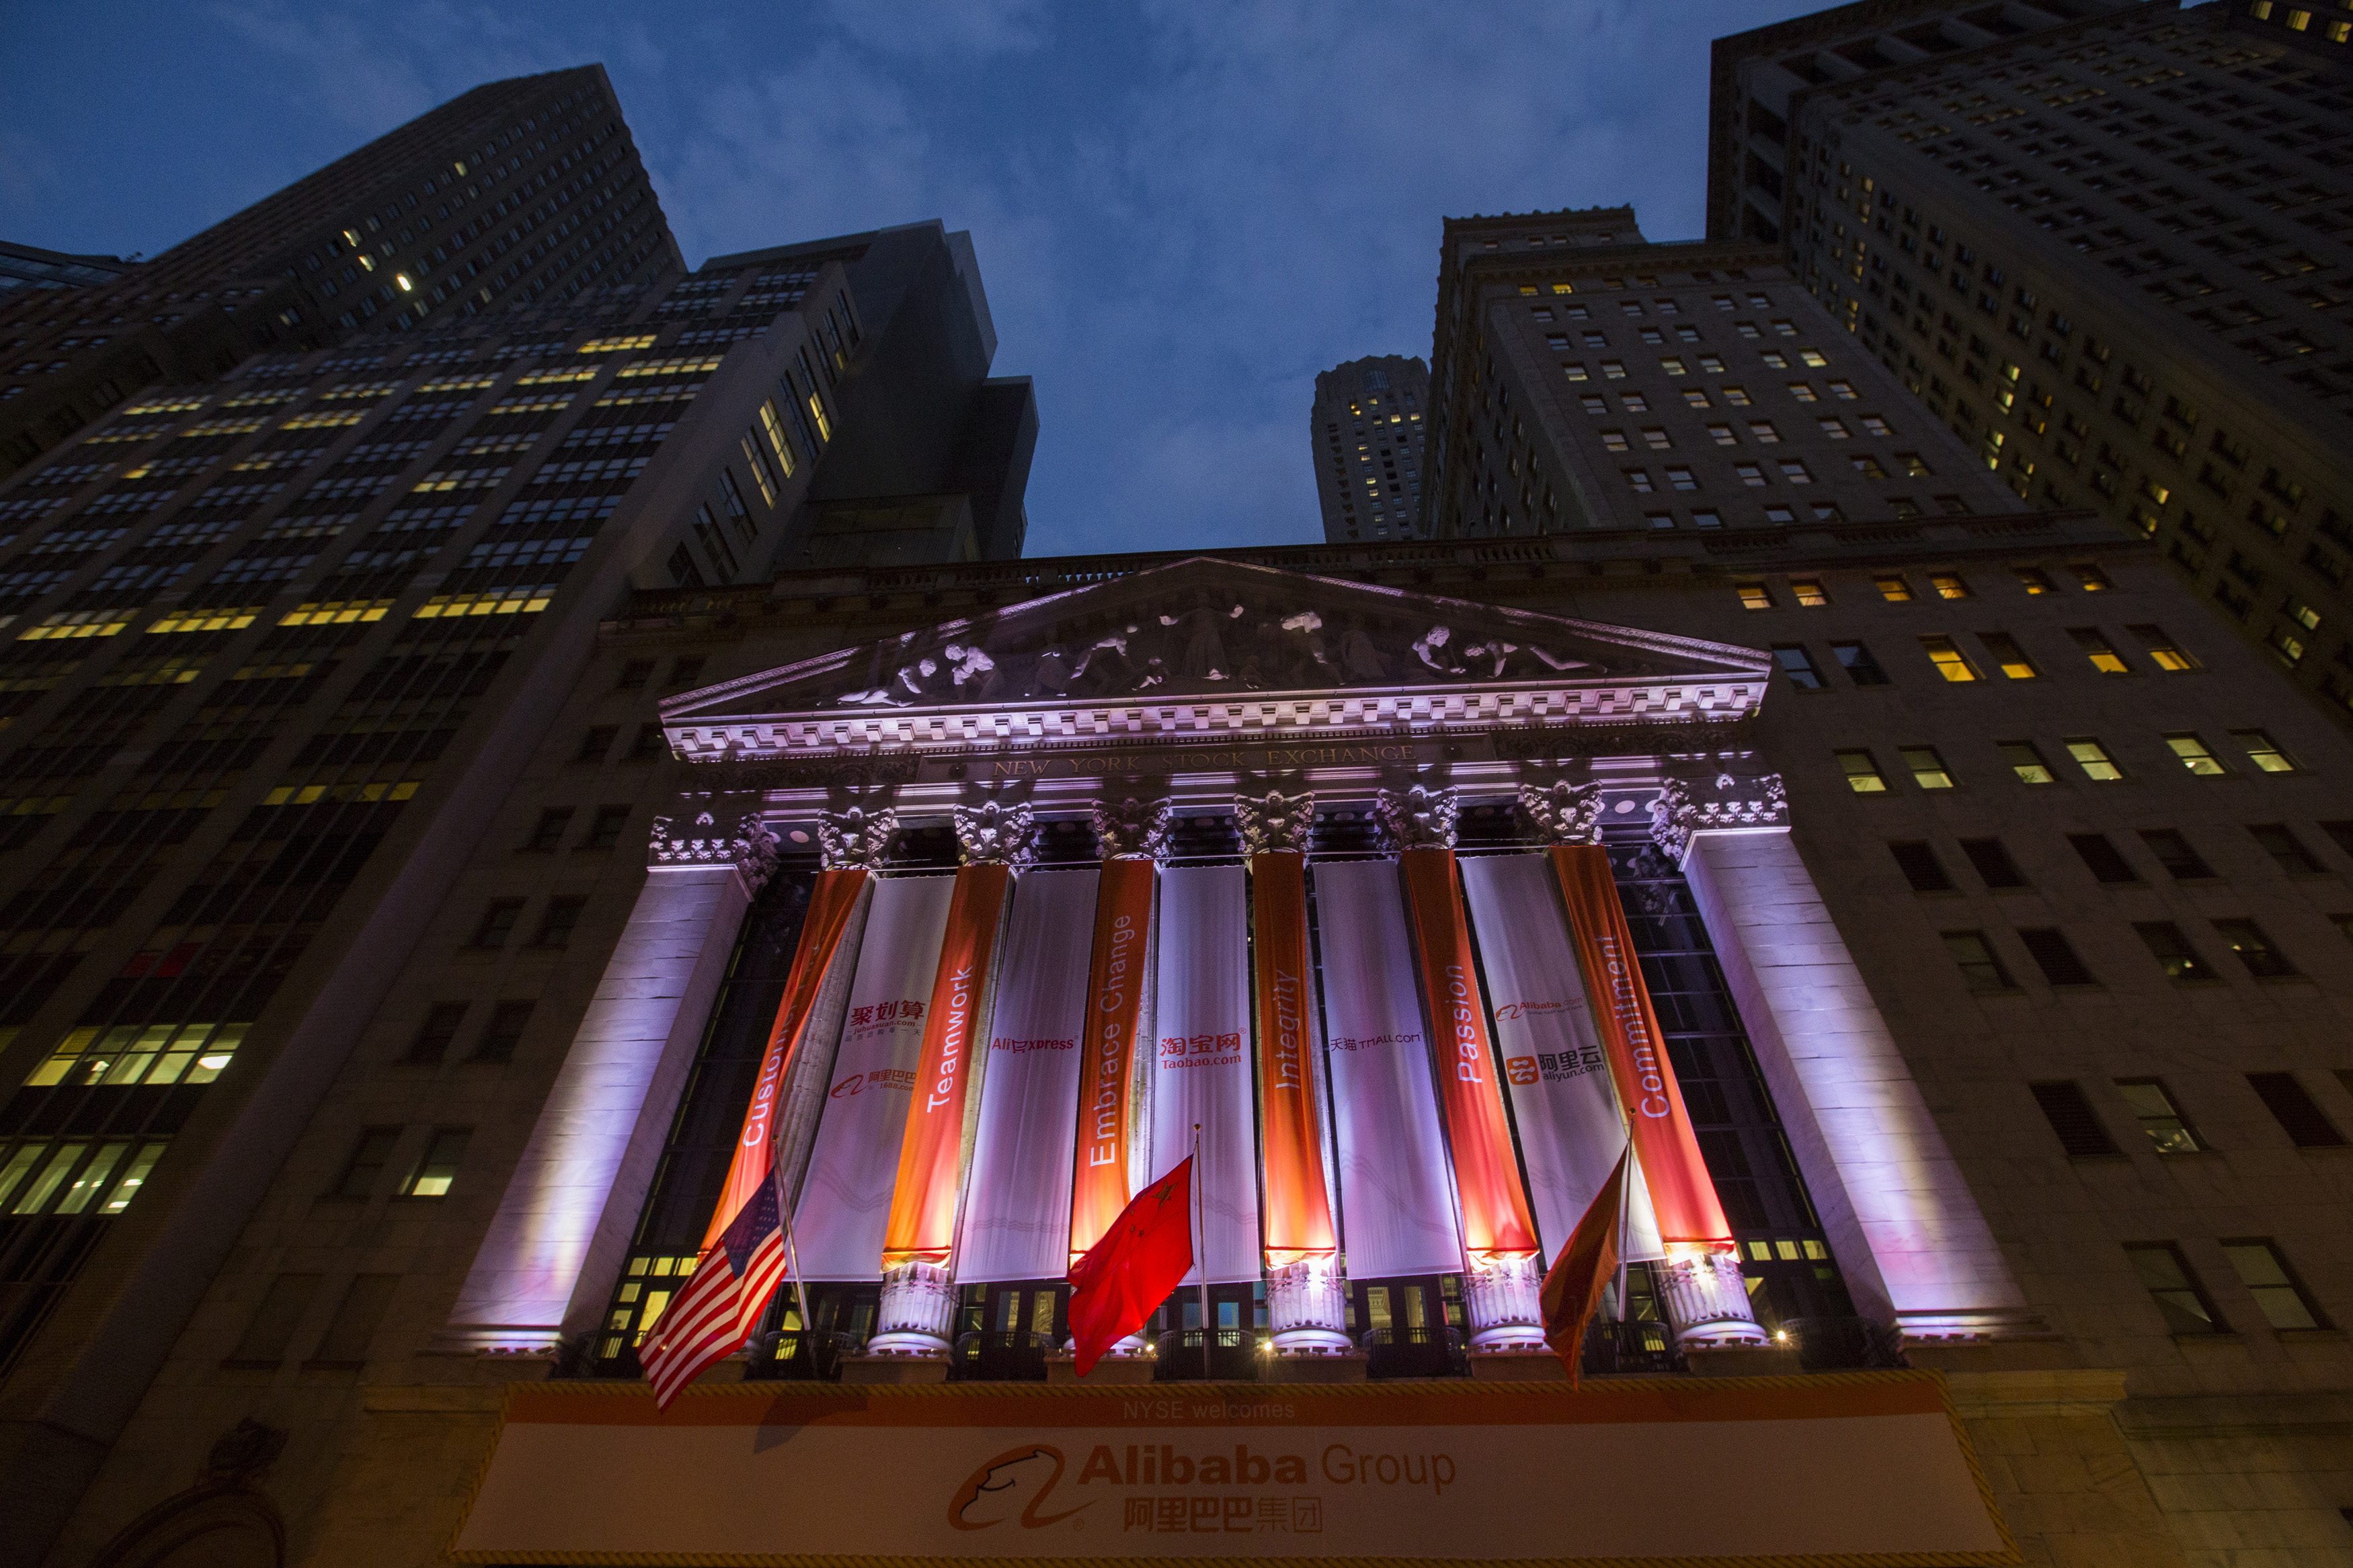 The sign showing the logo of Alibaba Group Holding is seen on the facade of the New York Stock Exchange before the company's initial public offering (IPO) September 19, 2014. REUTERS/Lucas Jackson